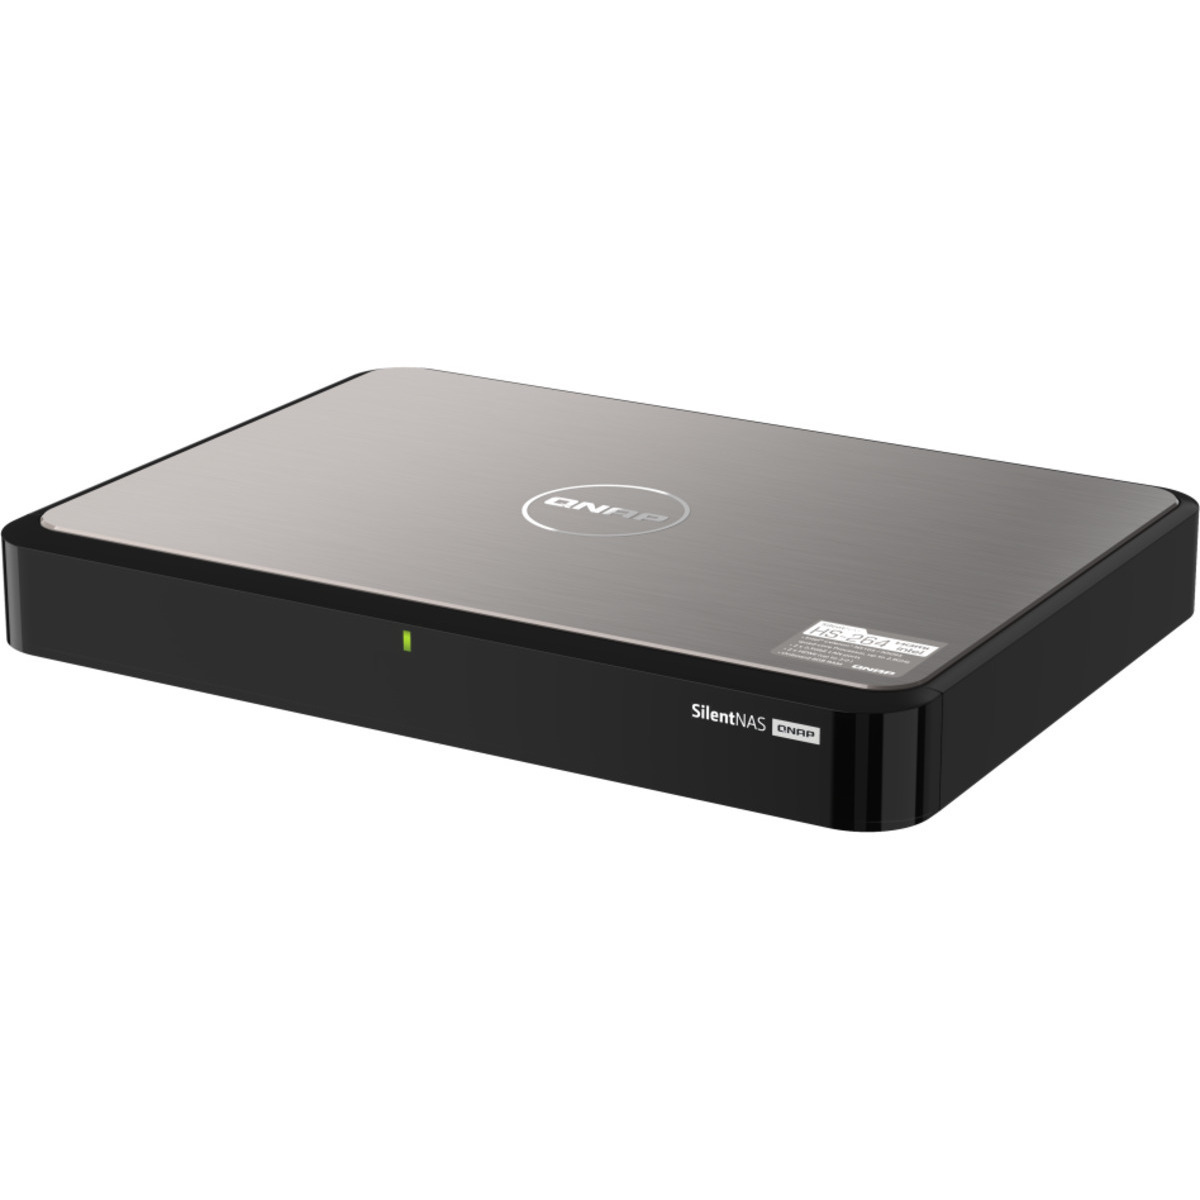 QNAP HS-264 8tb 2-Bay Desktop Multimedia / Power User / Business NAS - Network Attached Storage Device 2x4tb Samsung 870 QVO MZ-77Q4T0 2.5 560/530MB/s SATA 6Gb/s SSD CONSUMER Class Drives Installed - Burn-In Tested HS-264